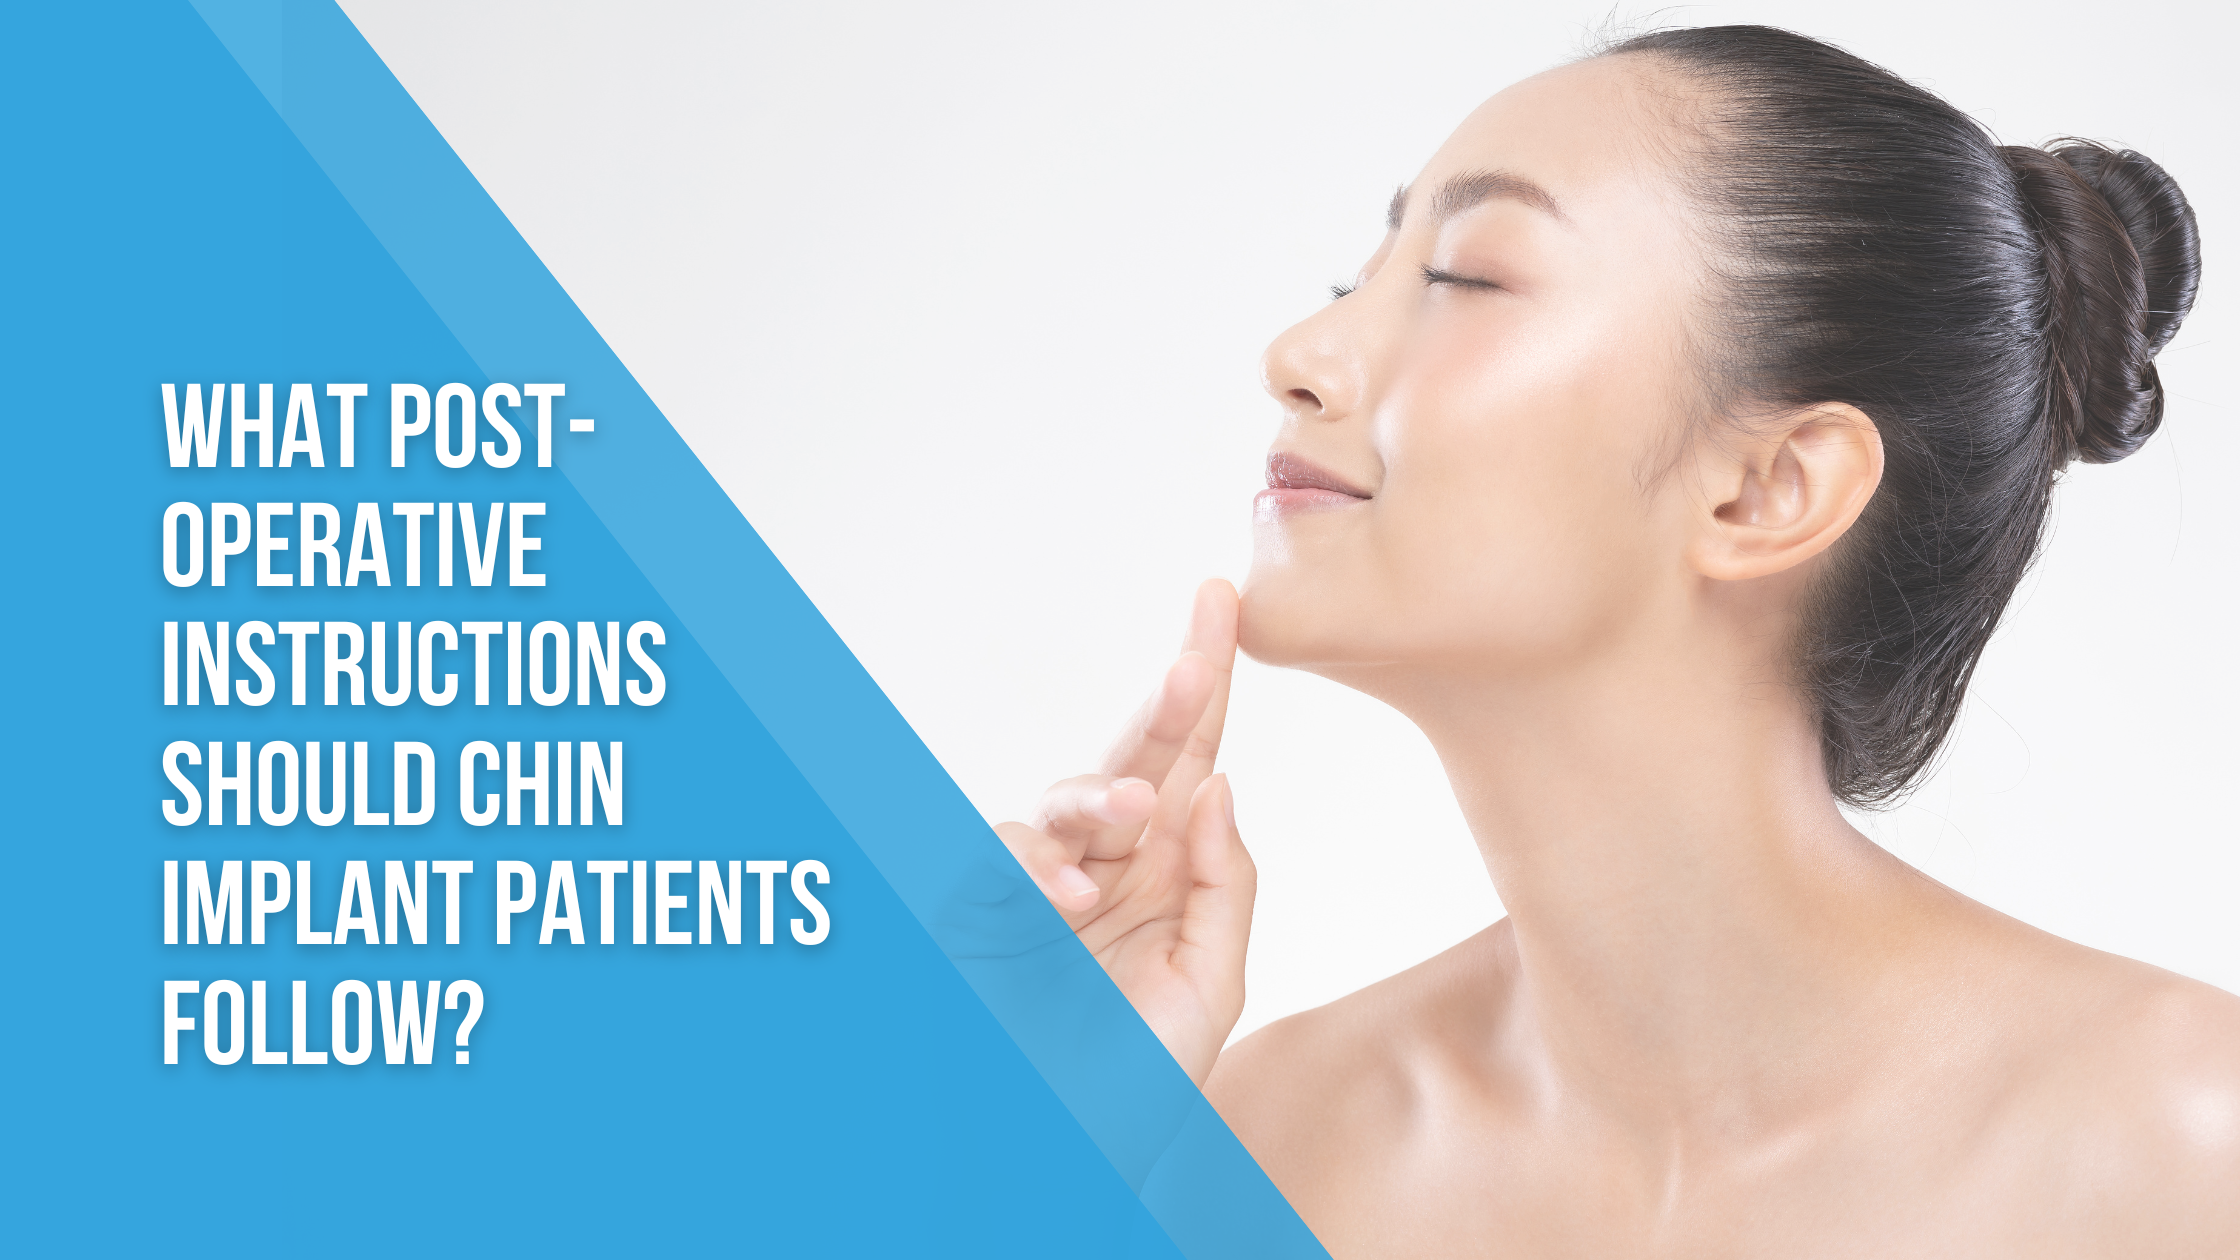 What Post-Operative Instructions Should Chin Implant Patients Follow?